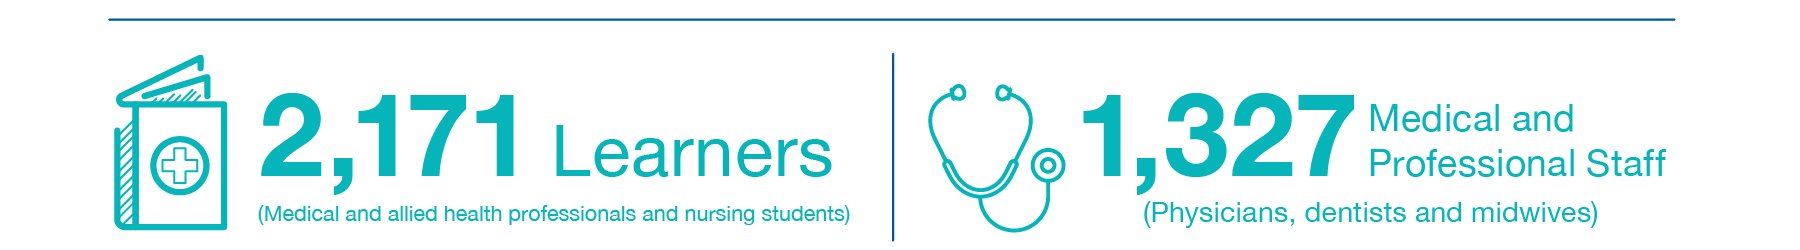 2,171 Learners (Medical and allied health professionals and nursing students). 1,327 Medical and Professional Staff (Physicians, dentists and midwives).